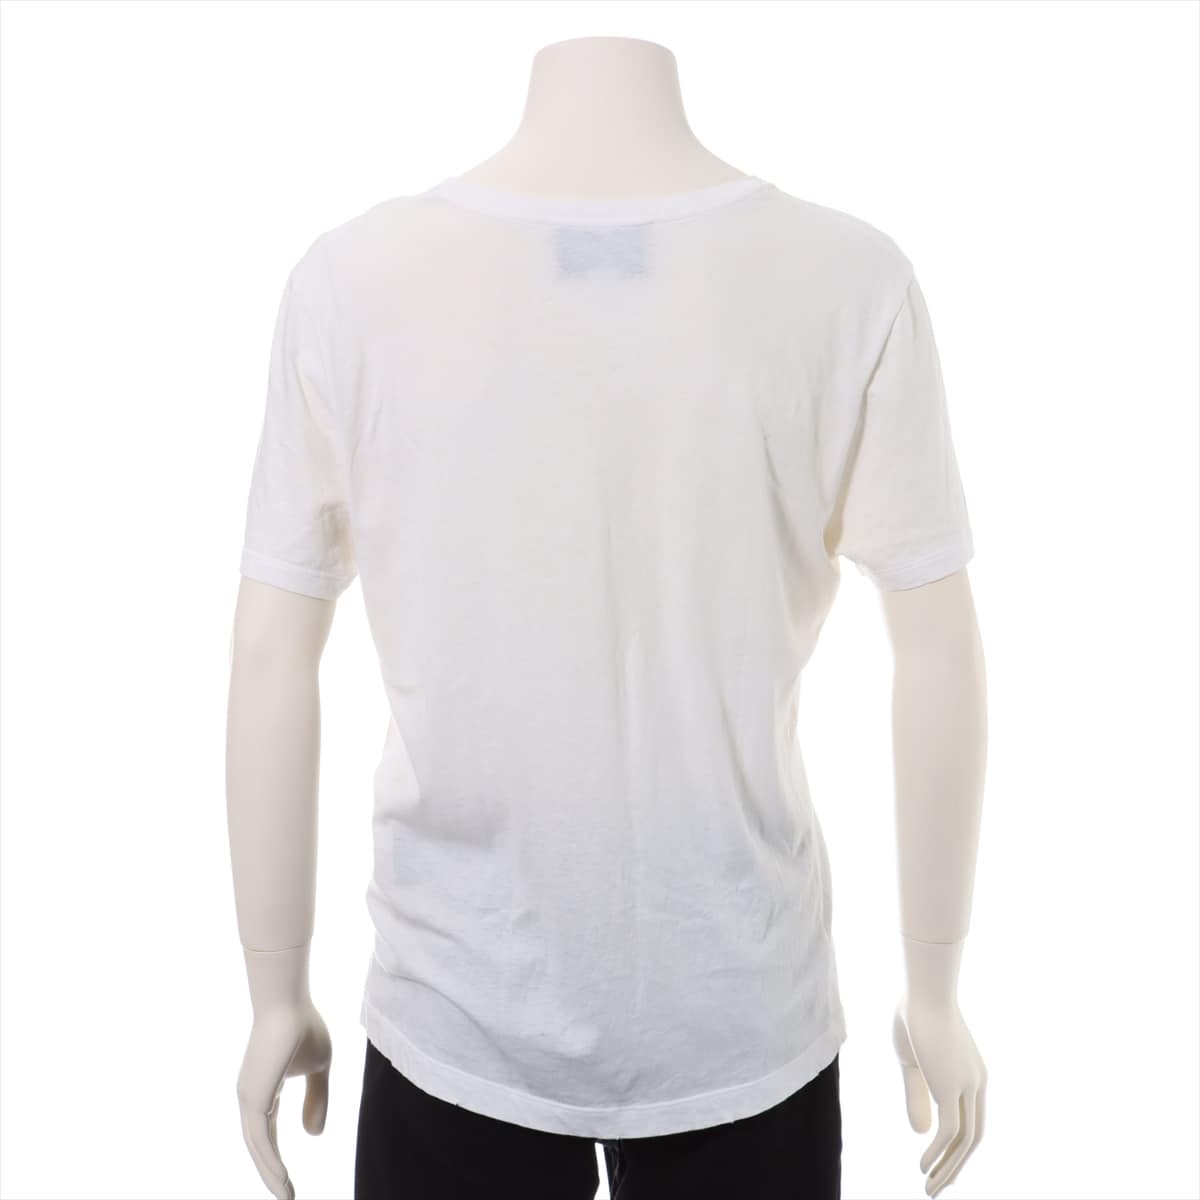 Gucci Vintage logo Cotton T-shirt XS Men's White  Damage processing There are spots on the armpits